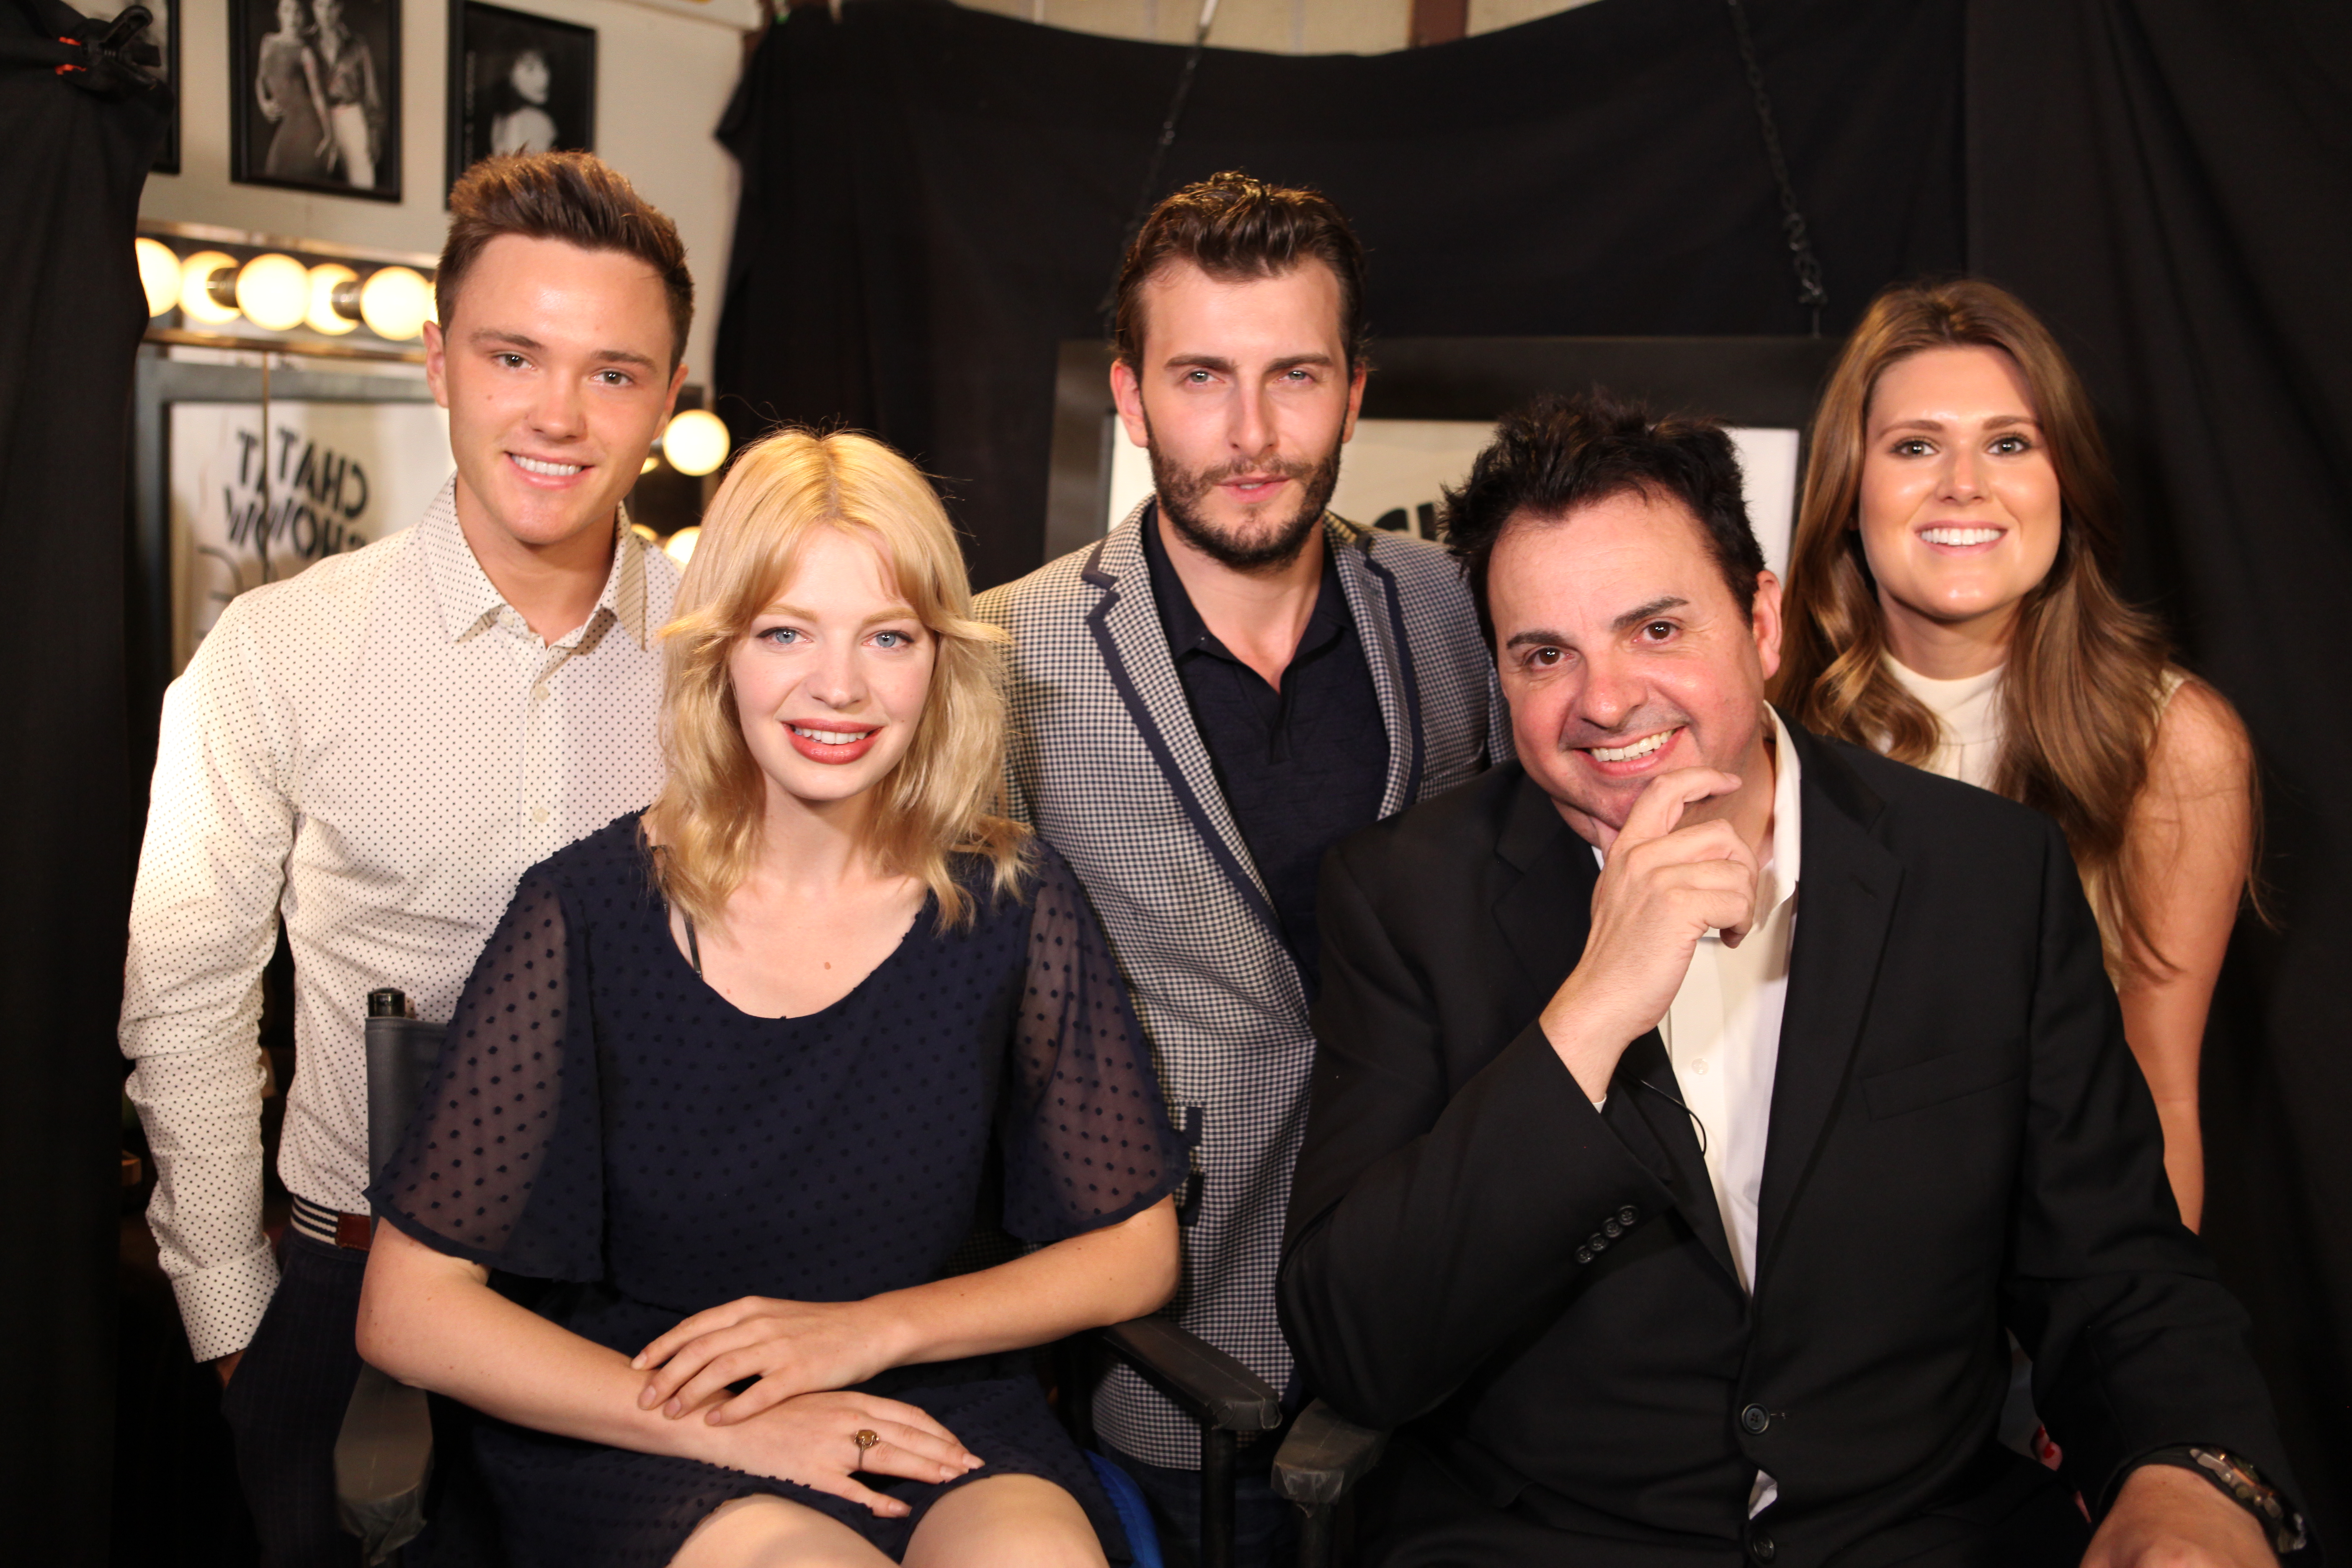 Charlotte on Actors E Chat, with host Sandro Monetti and fellow guest stars Cameron Moir, Declan Laird and Chloe Farnworth.